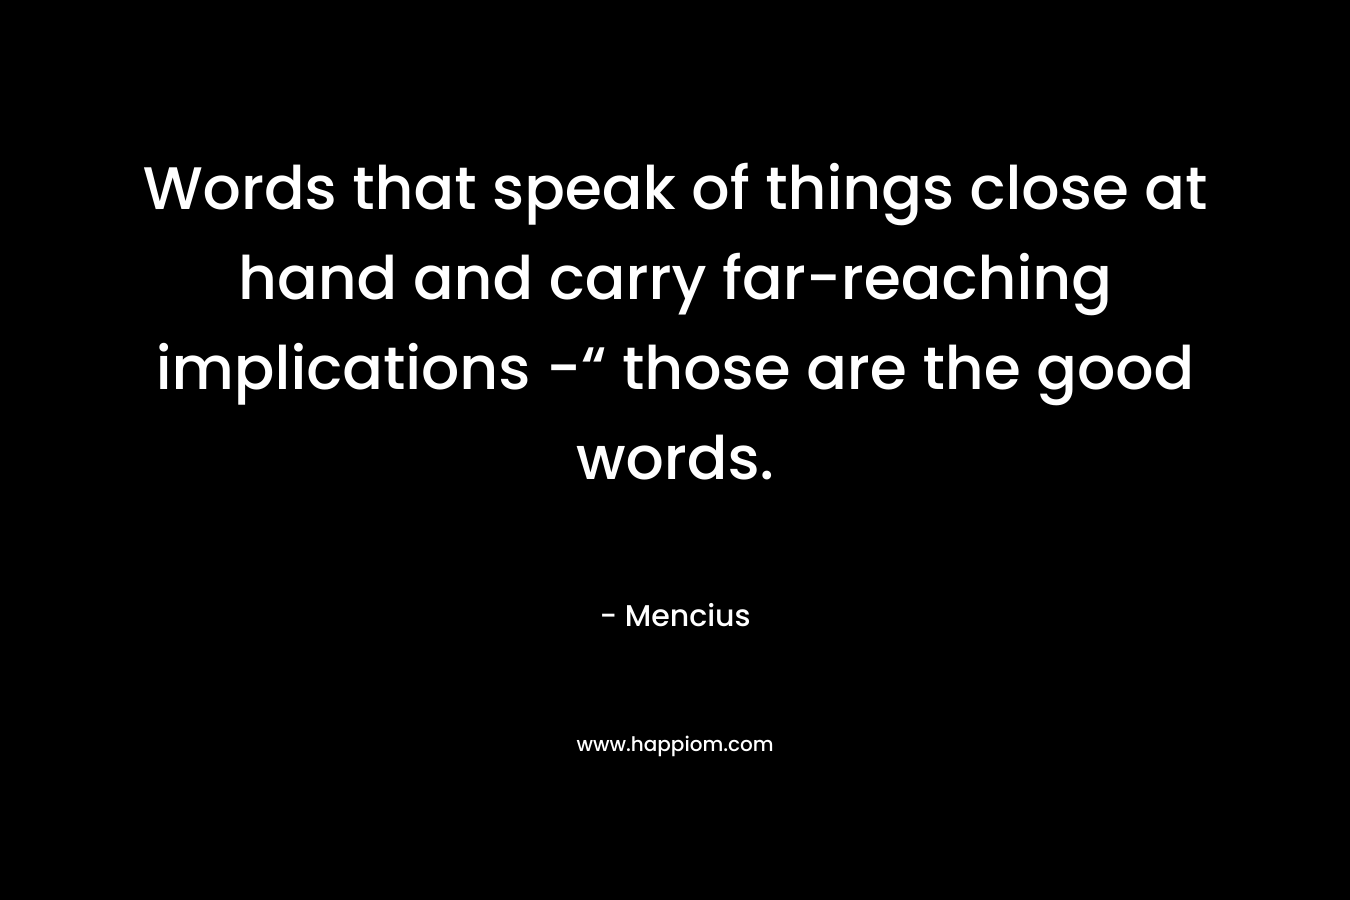 Words that speak of things close at hand and carry far-reaching implications -“ those are the good words. – Mencius